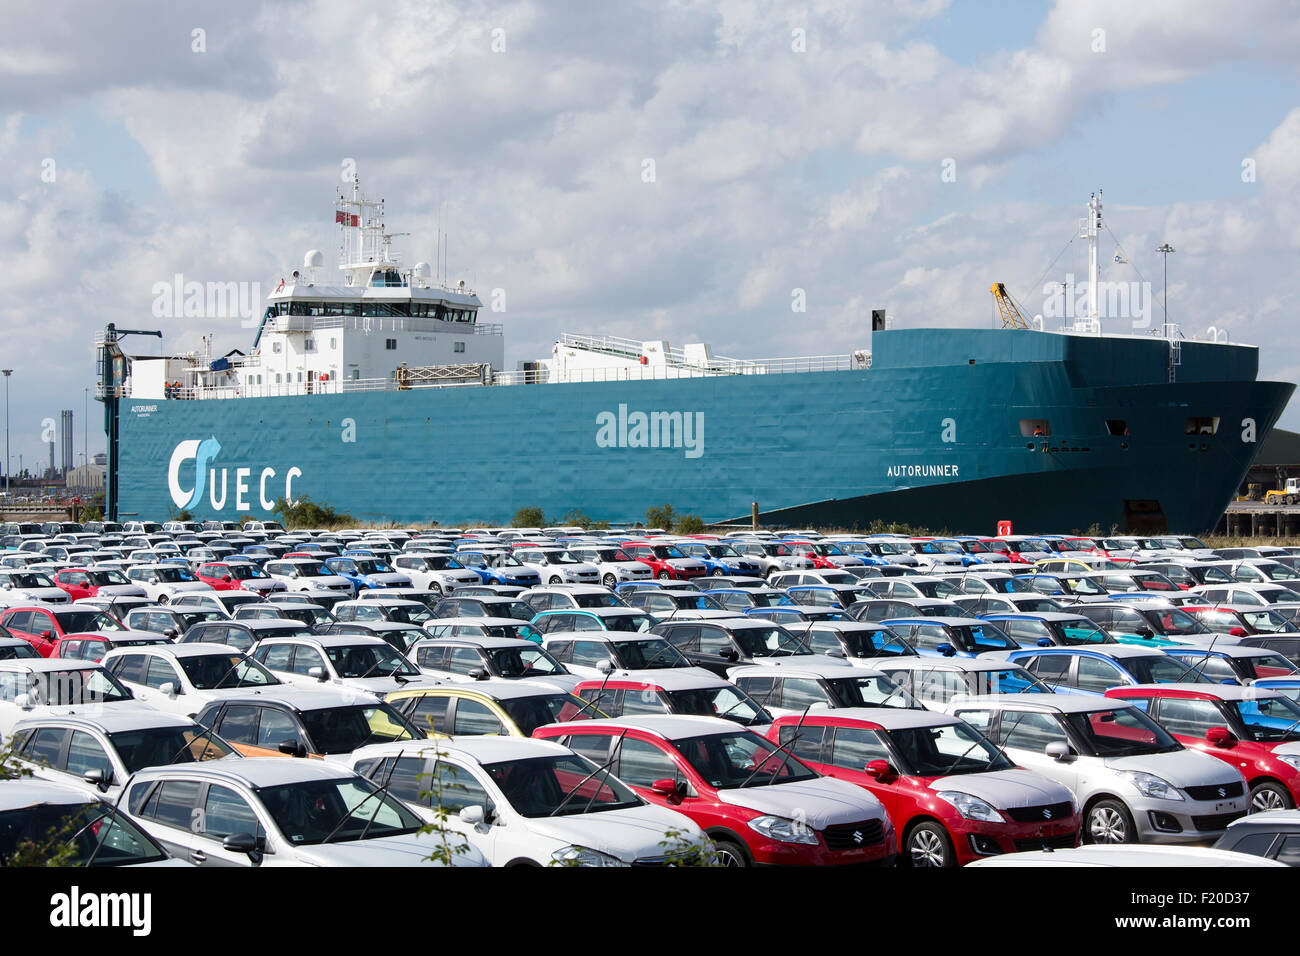 Imported new Suzuki vehicles at Grimsby docks cars waiting to be delivered to garages around the UK Stock Photo